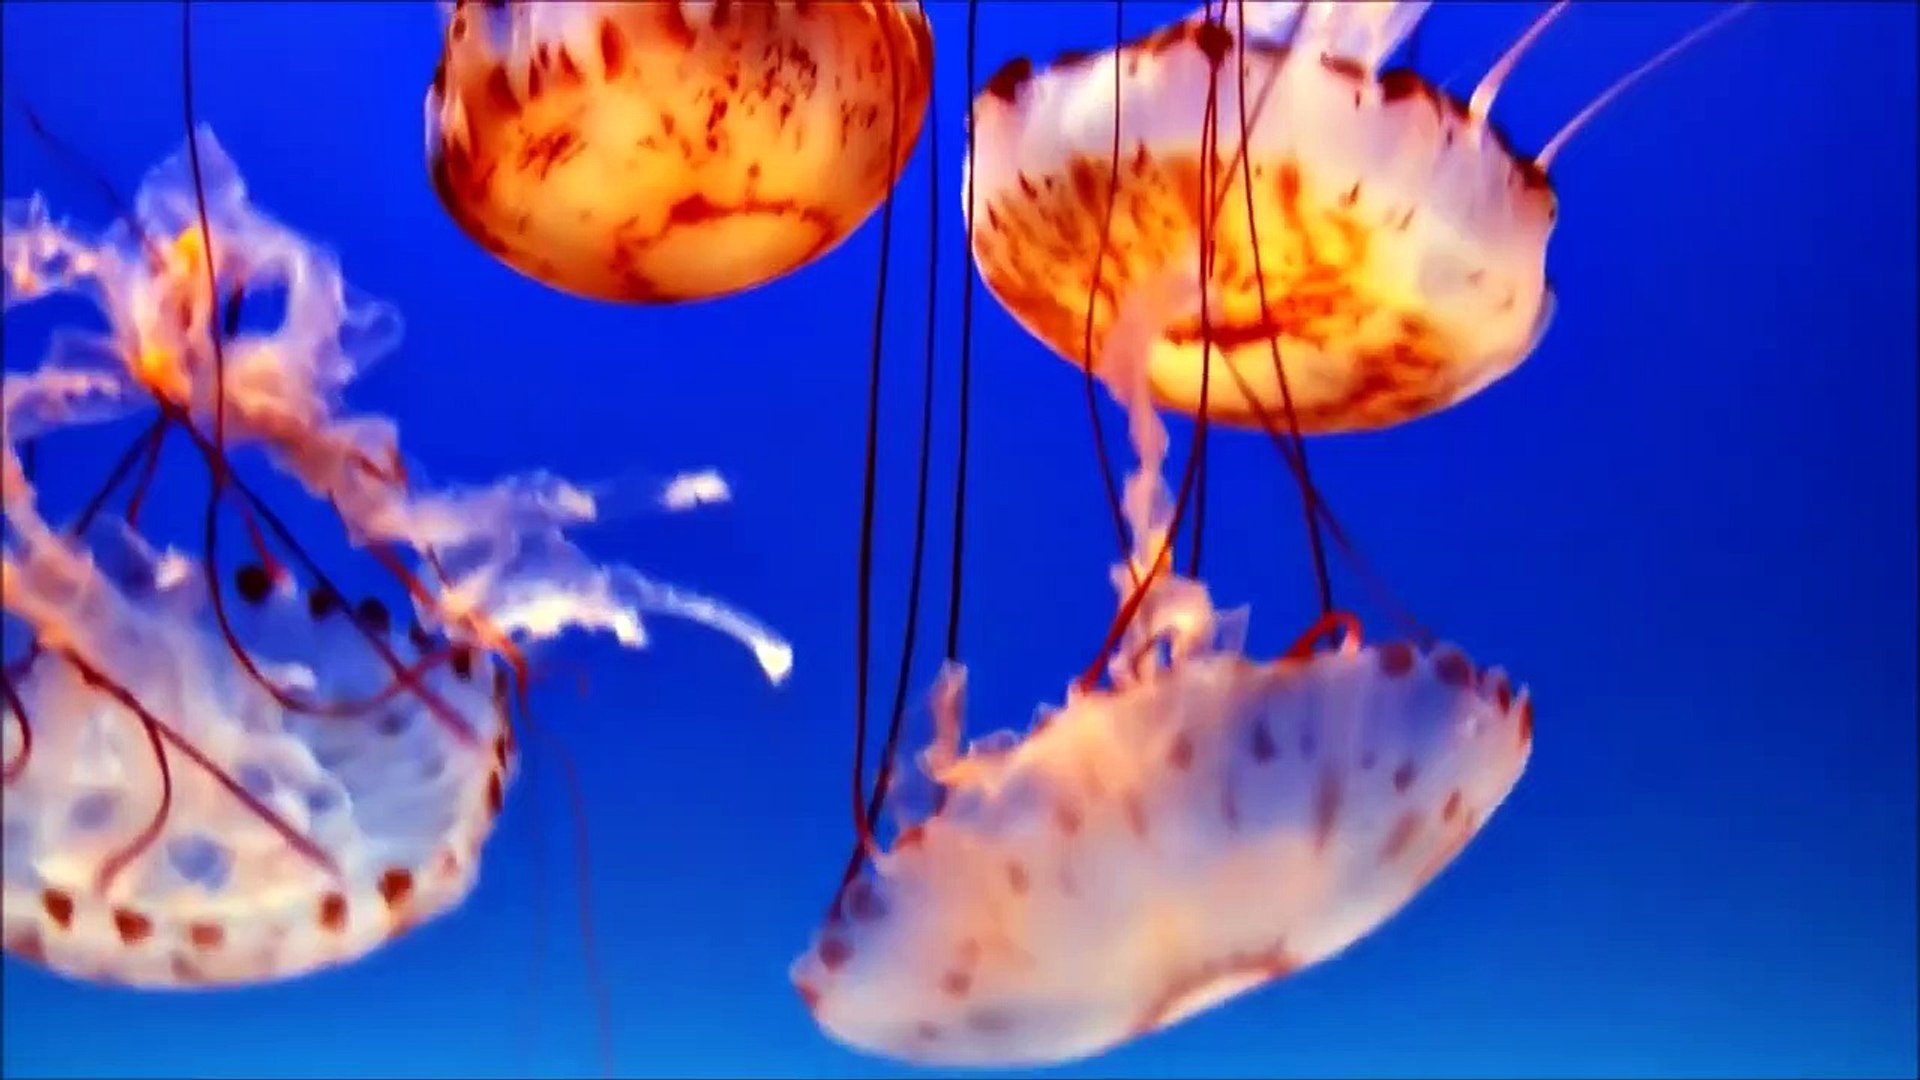 All About Jellyfish for Kidsfor Children - FreeSchoo